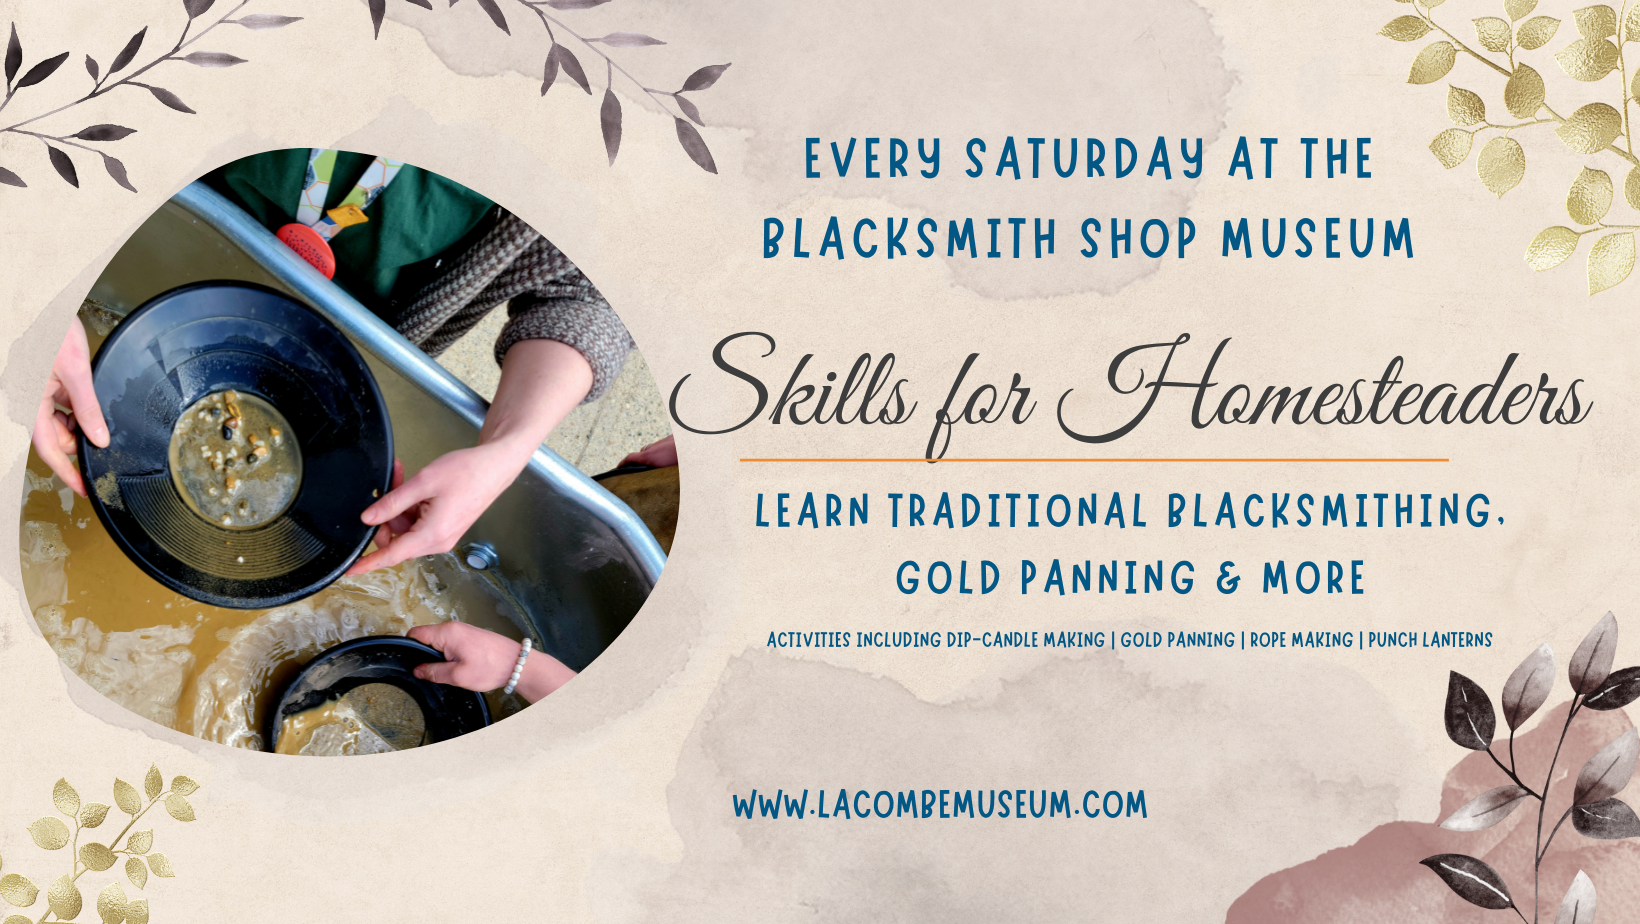 Skills for Homesteaders at the Blacksmith Shop Museum